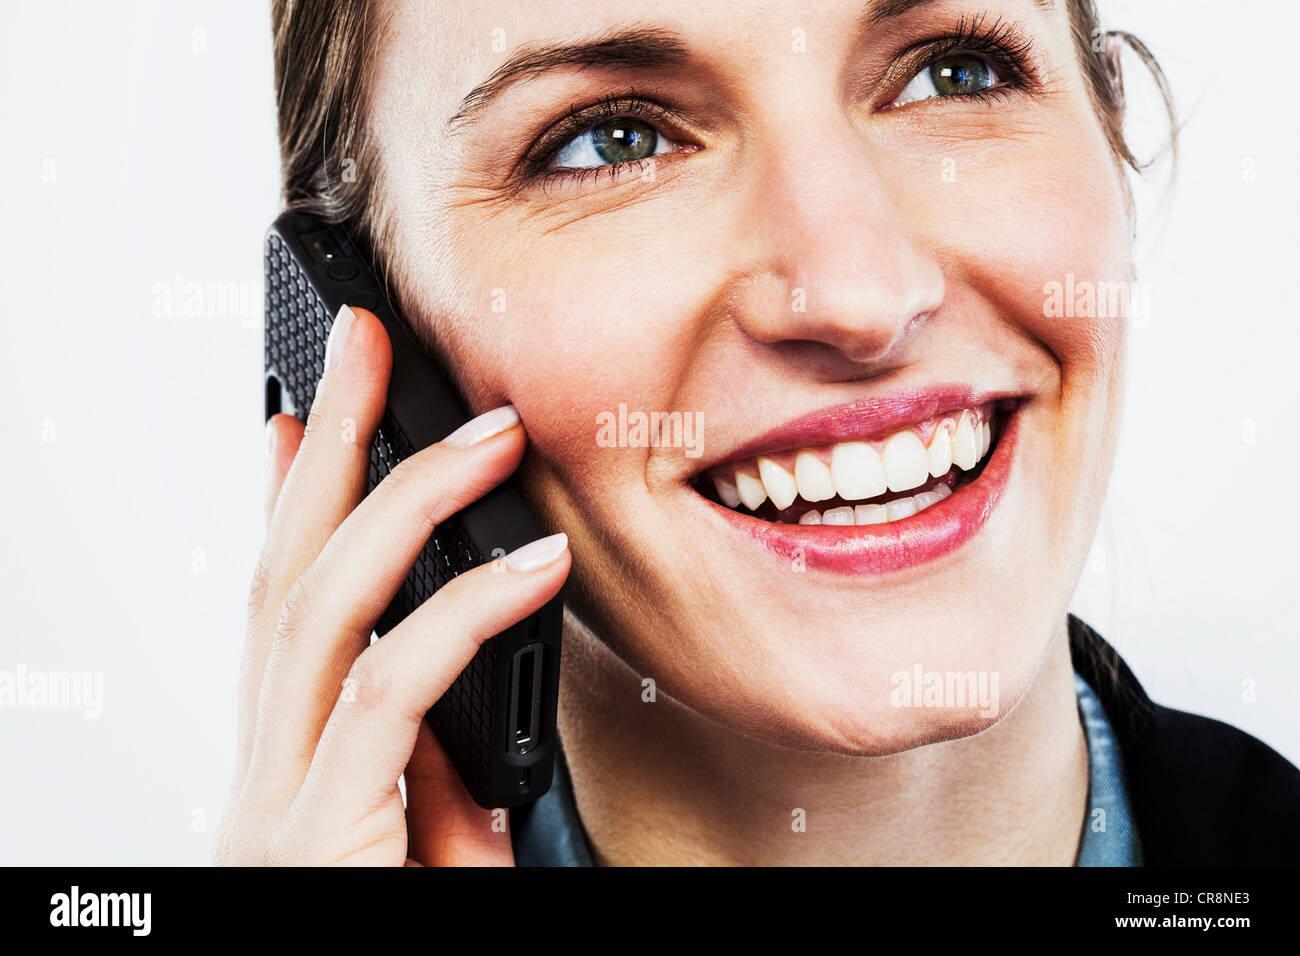 Young woman on smartphone Stock Photo